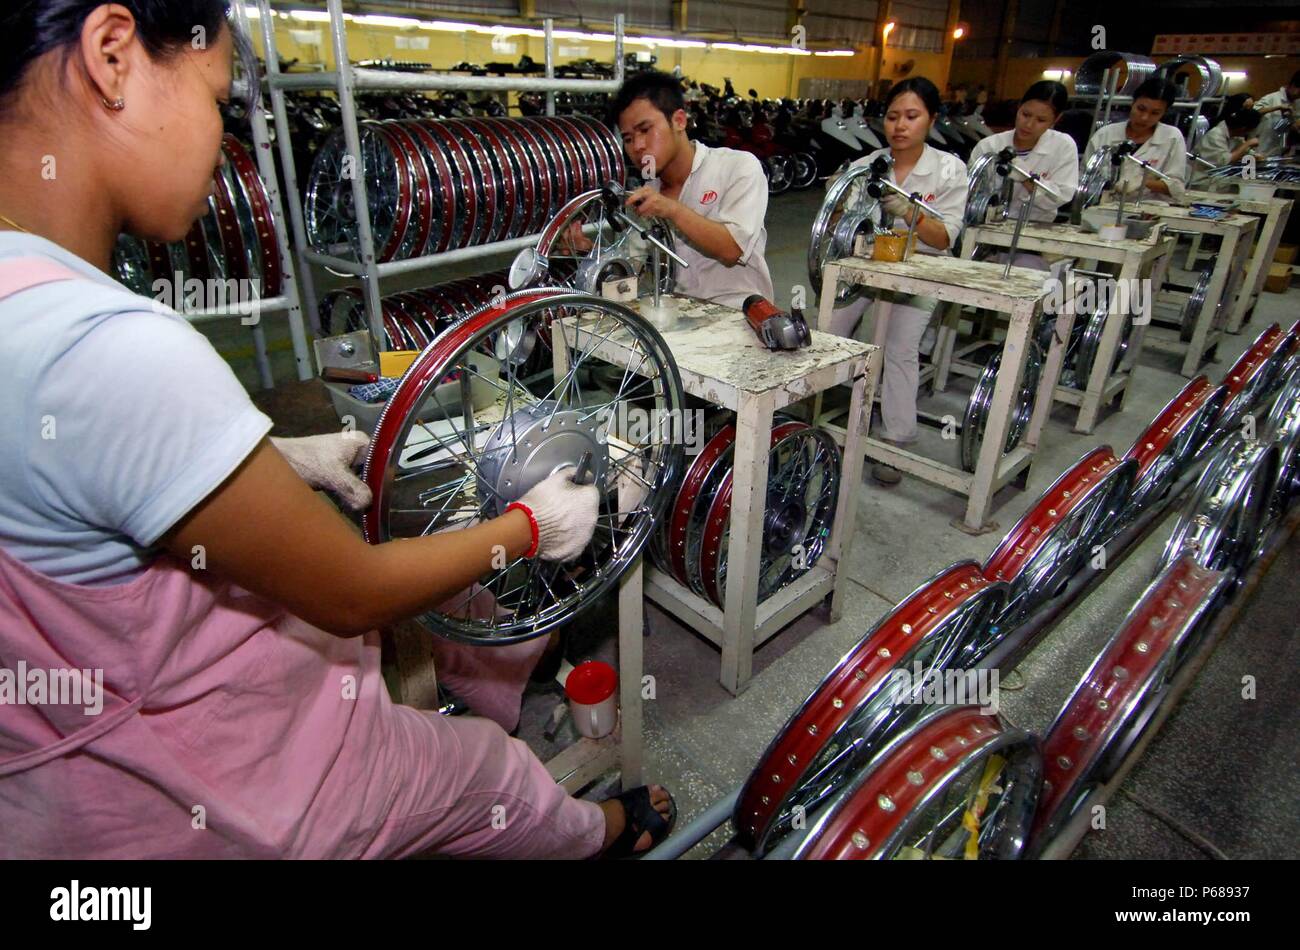 Beijing, Vietnam. 6th July, 2007. Vietnamese workers assemble motorcycle parts at a joint venture of Chinese motorcycle company Lifan, in Hung Yen Province, Vietnam, July 6, 2007. (TO GO WITH Xinhua Headlines: China's WTO entry a benefit to the world) Credit: Zhou Wenjie/Xinhua/Alamy Live News Stock Photo